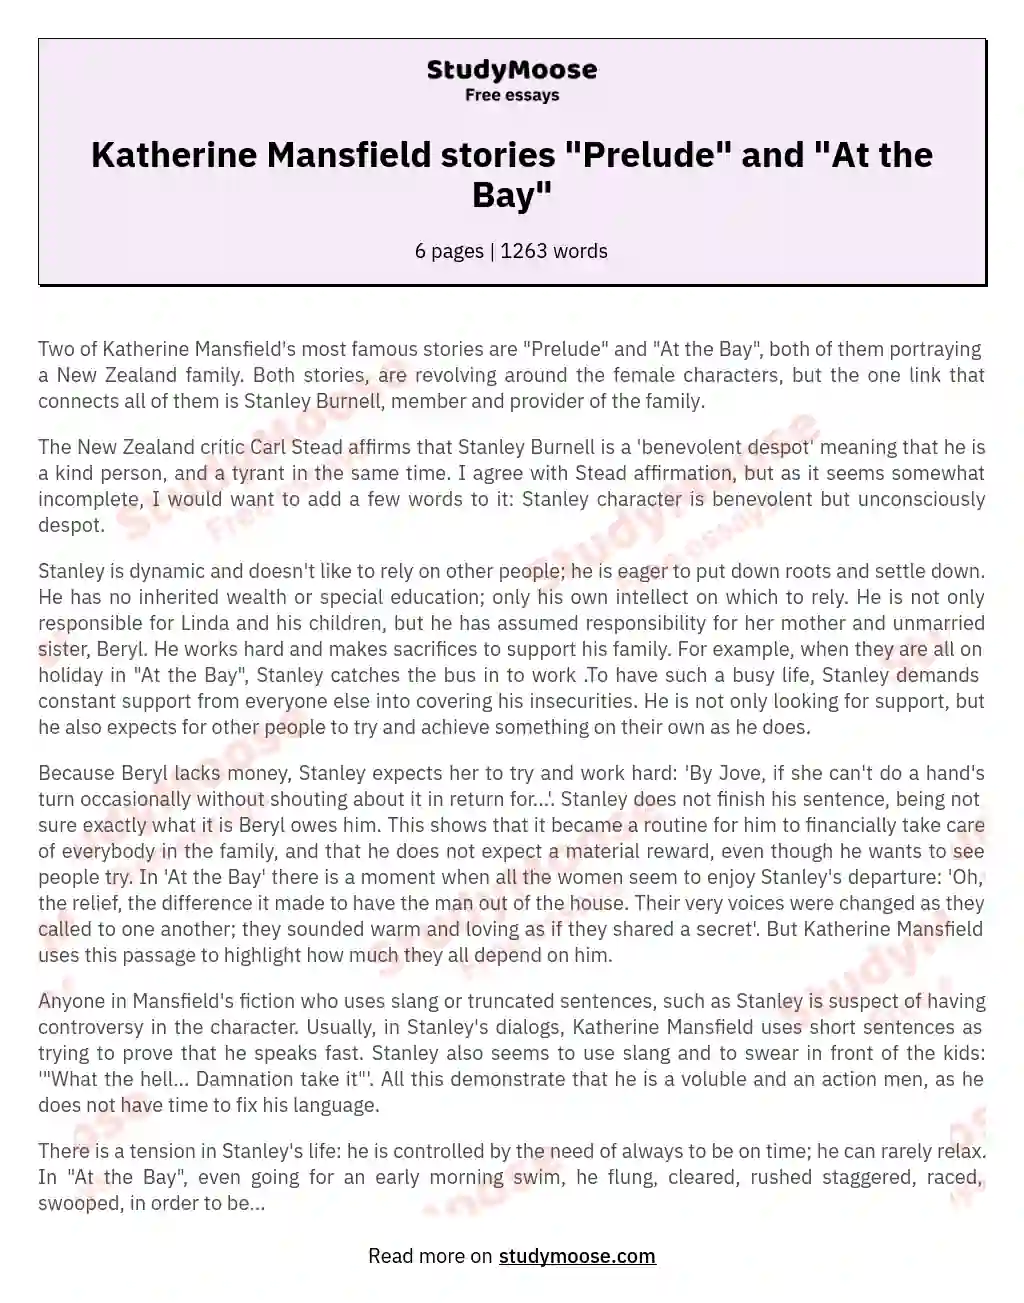 Katherine Mansfield stories "Prelude" and "At the Bay"